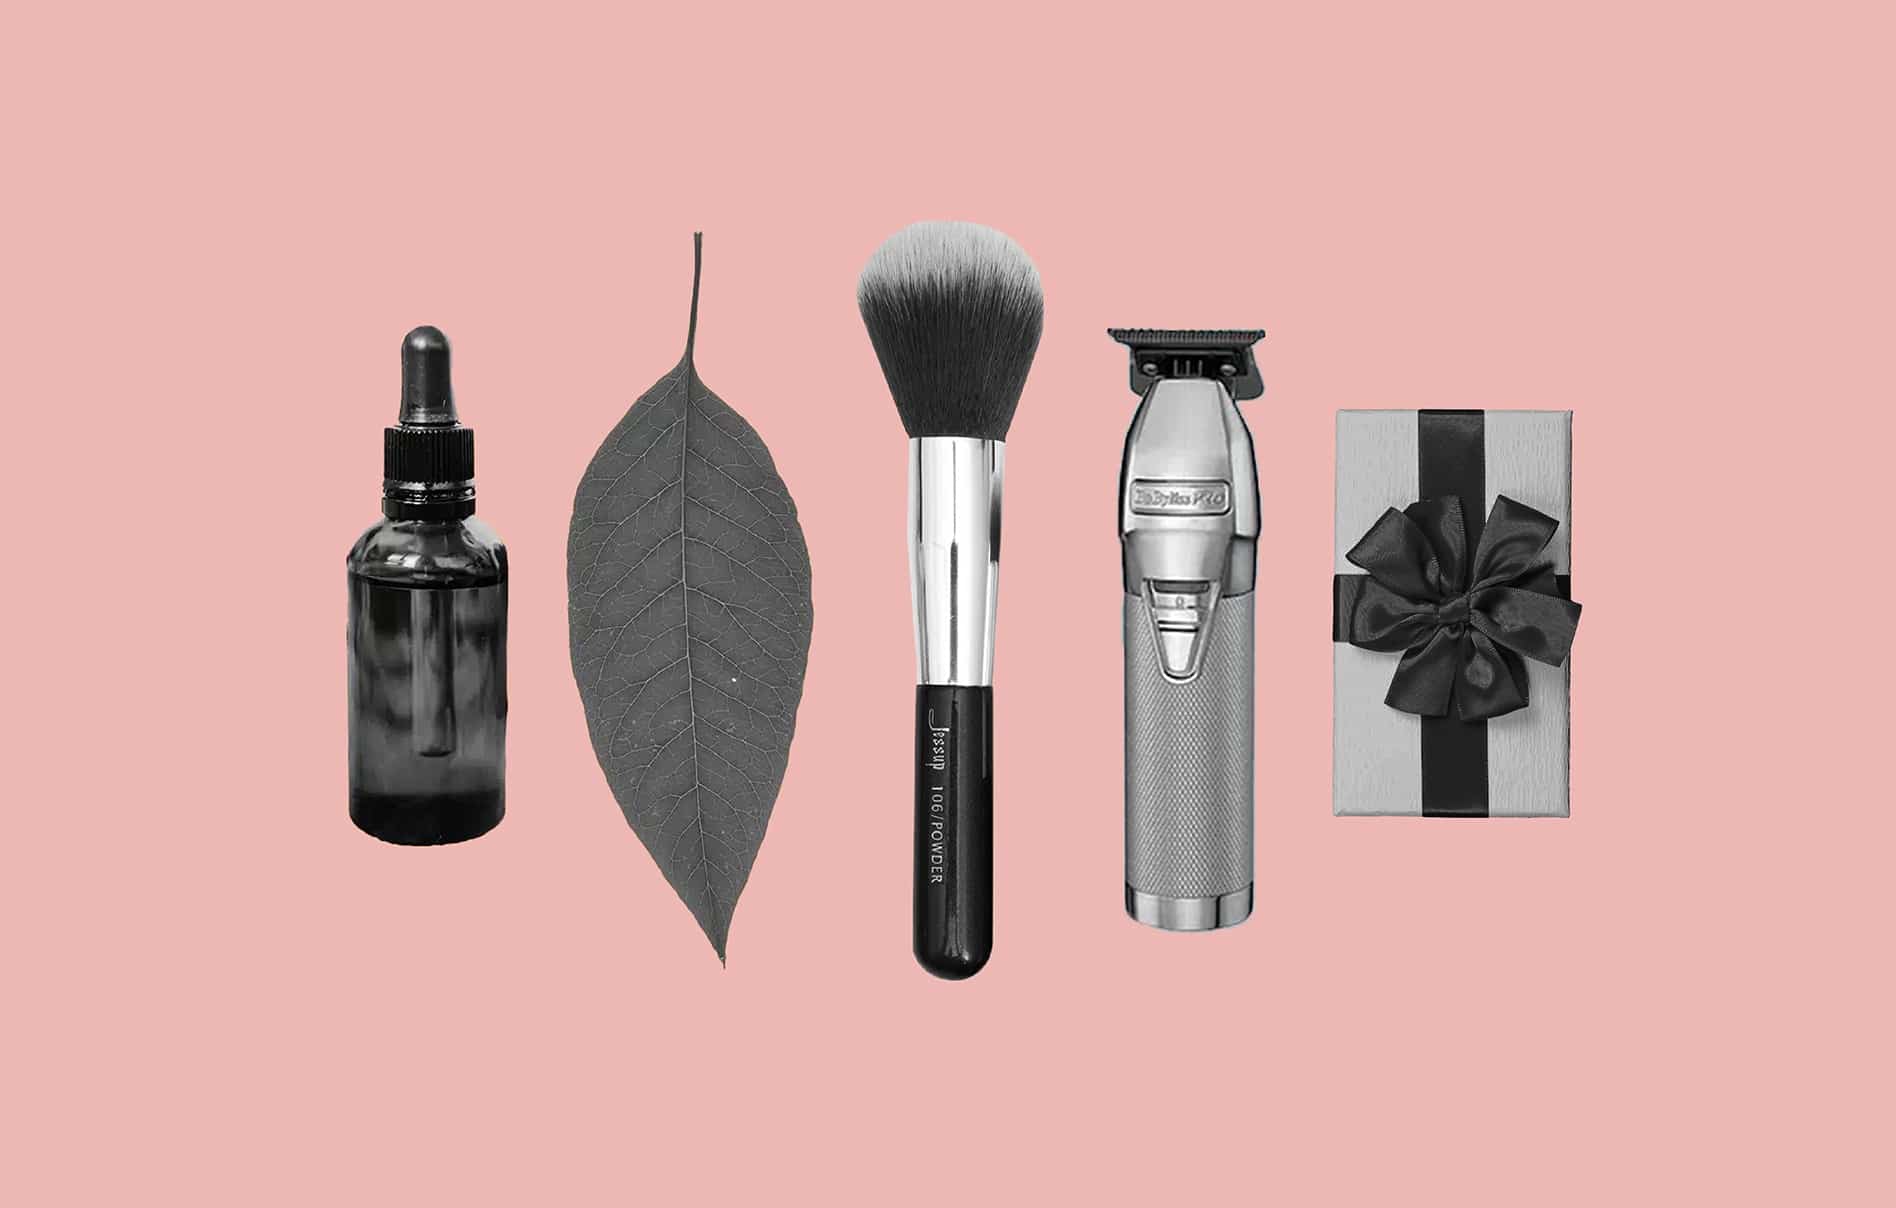 A bottle of face oil, a leaf, a makeup brush, clippers, and a small wrapped gift